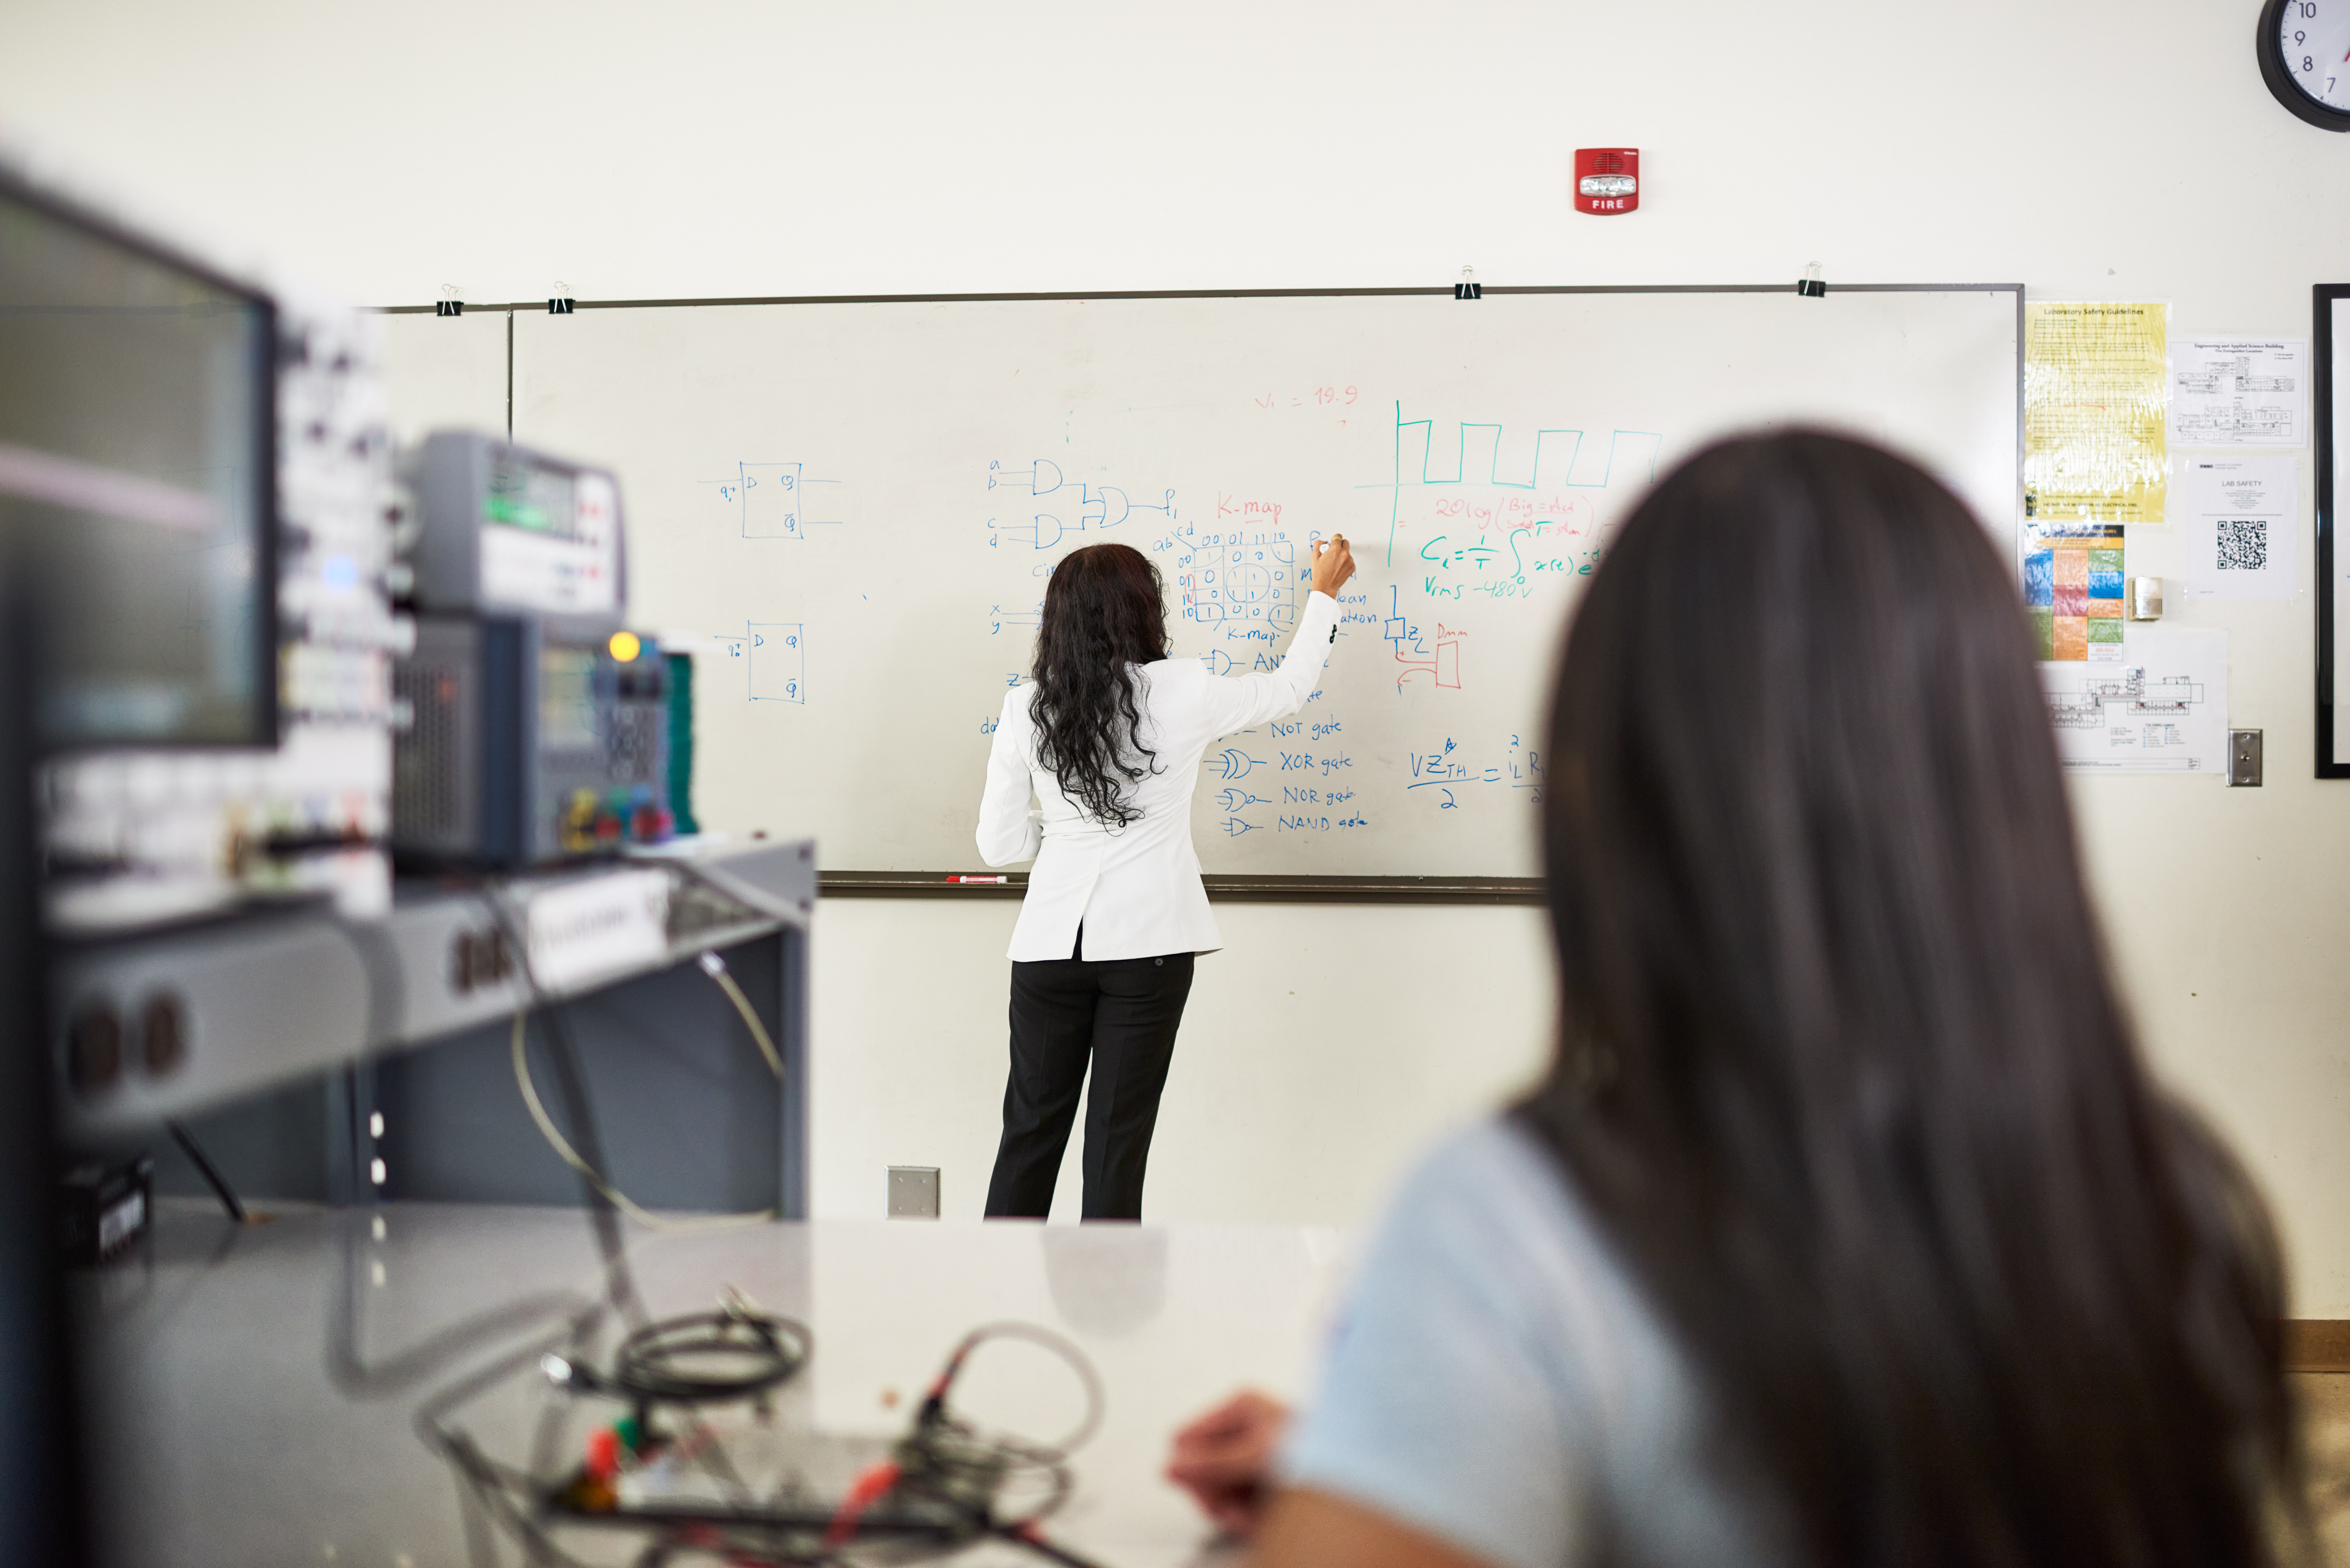 A woman stands at a whiteboard drawing diagrams while a student watches.